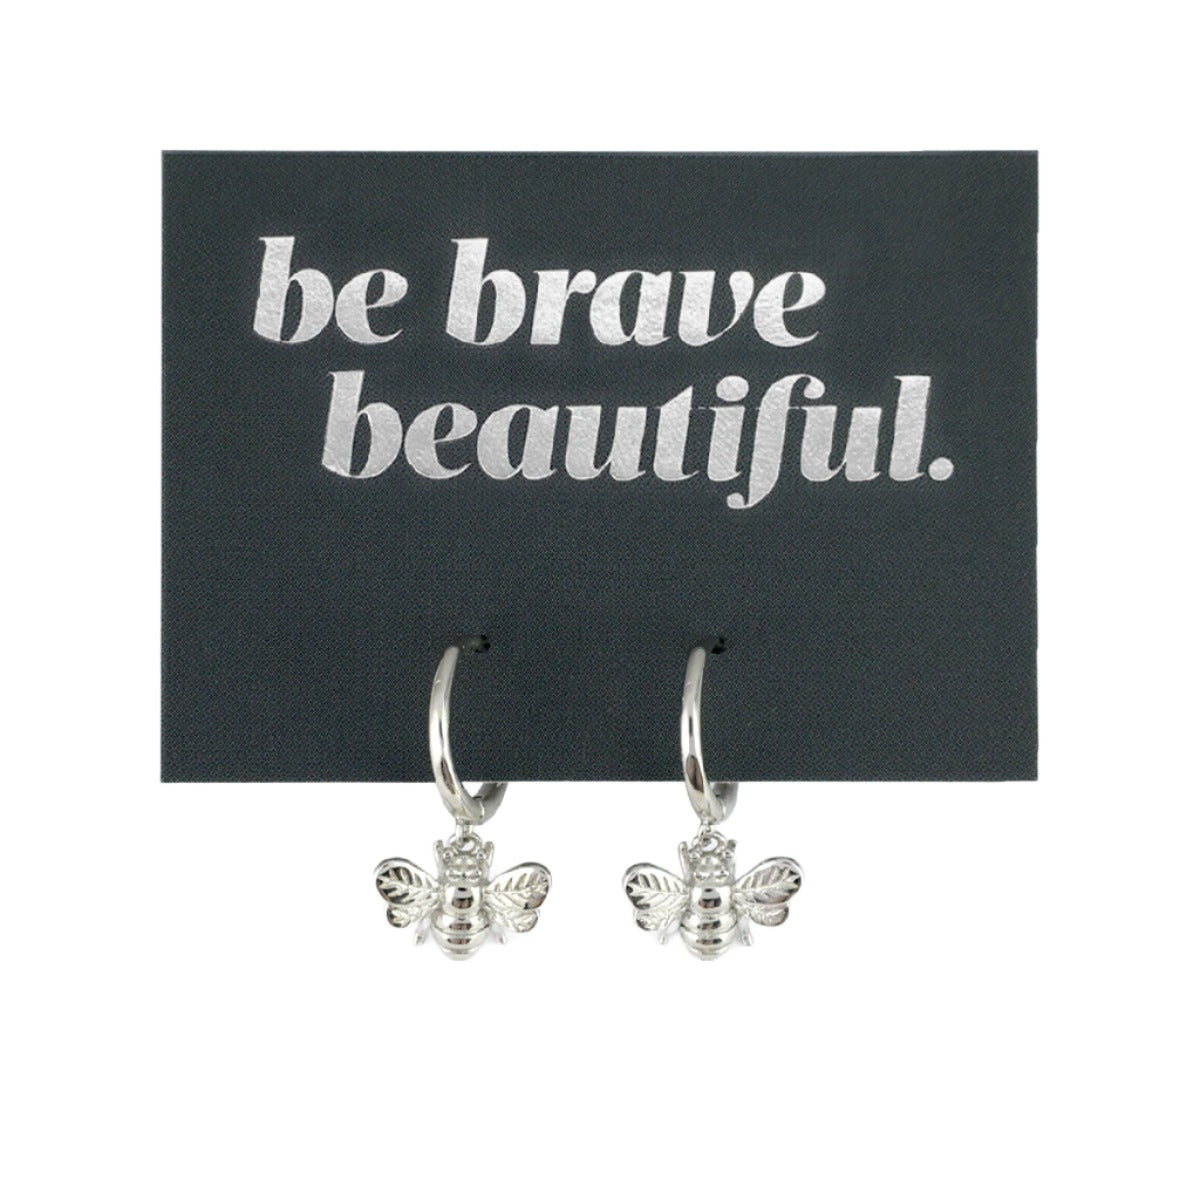 HUGGIES - Be Brave Beautiful - Sterling Silver Hoops with Bee Charm (8816-F)